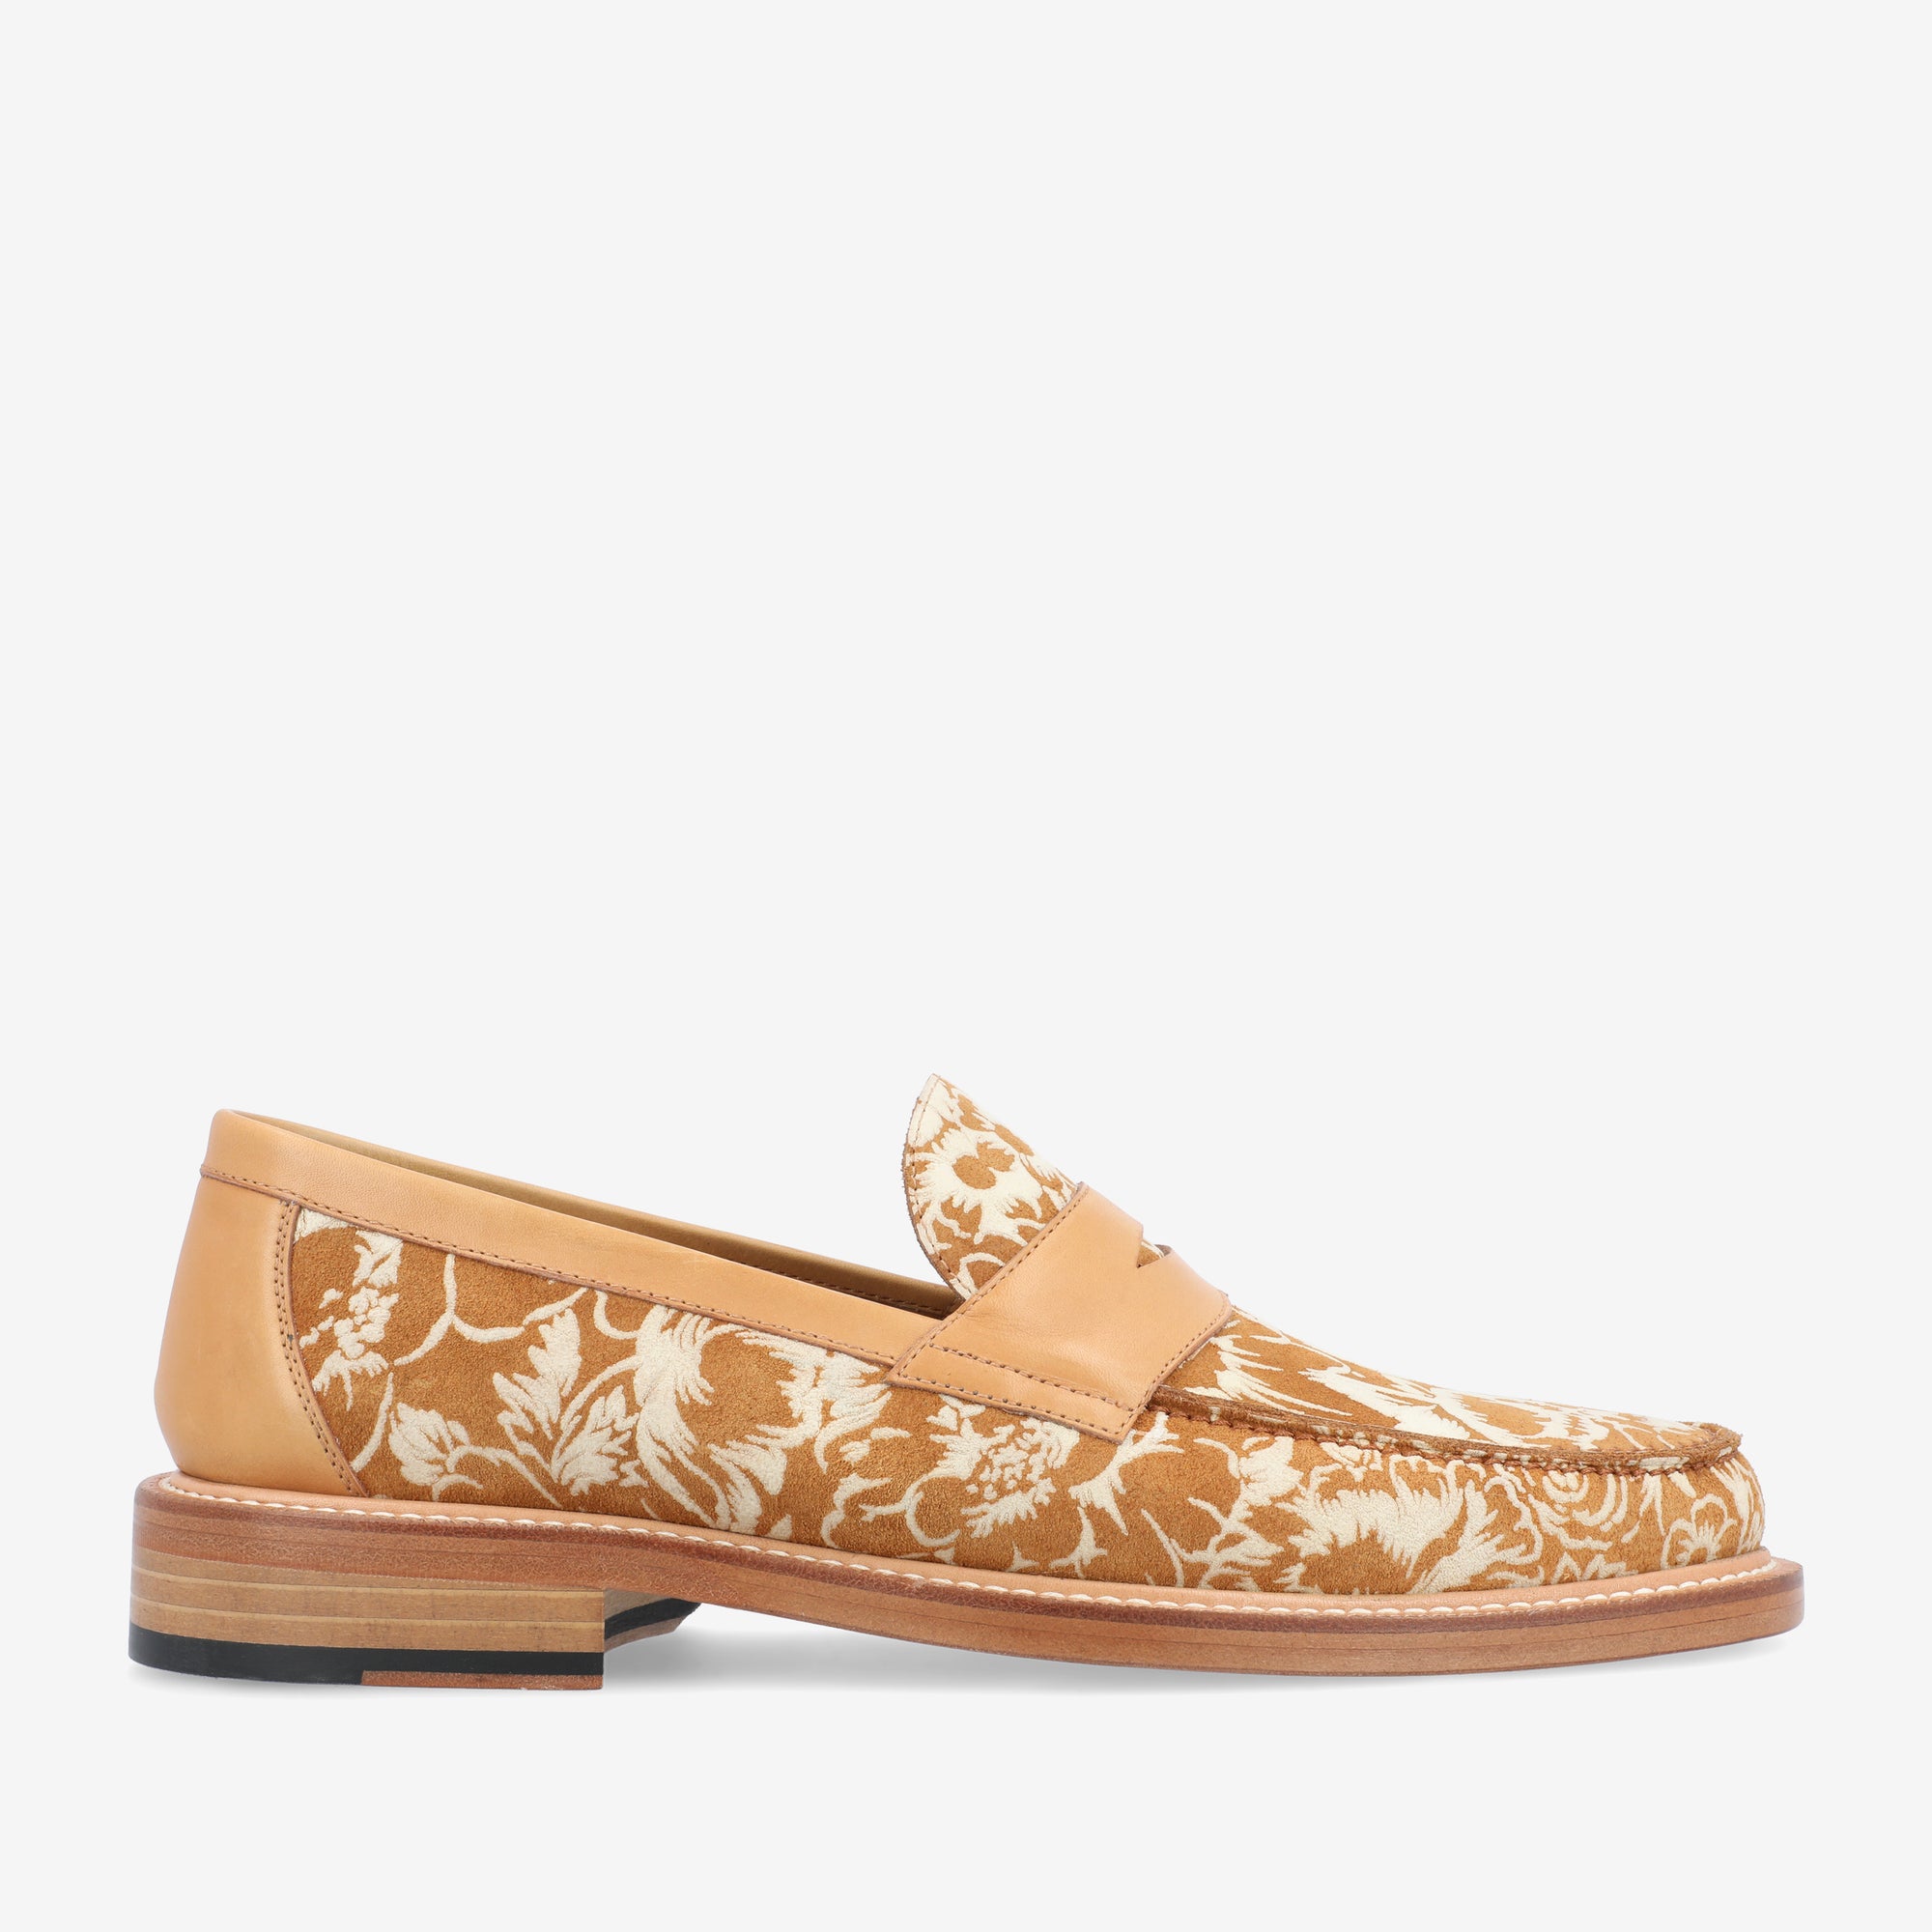 The Fitz Loafer in Floral